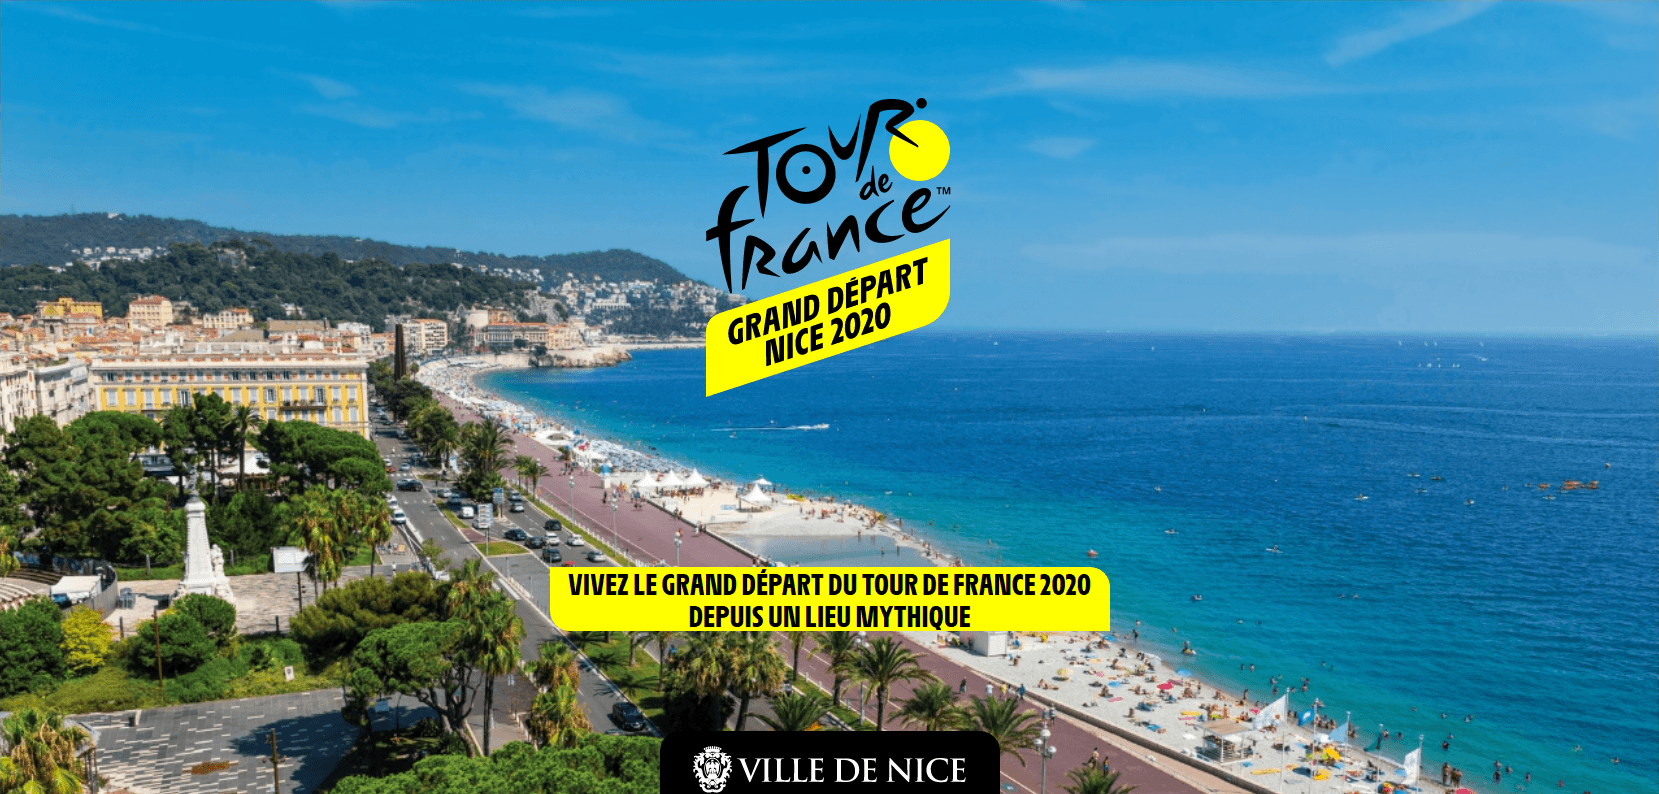 Experience the start of the Tour de France in Nice